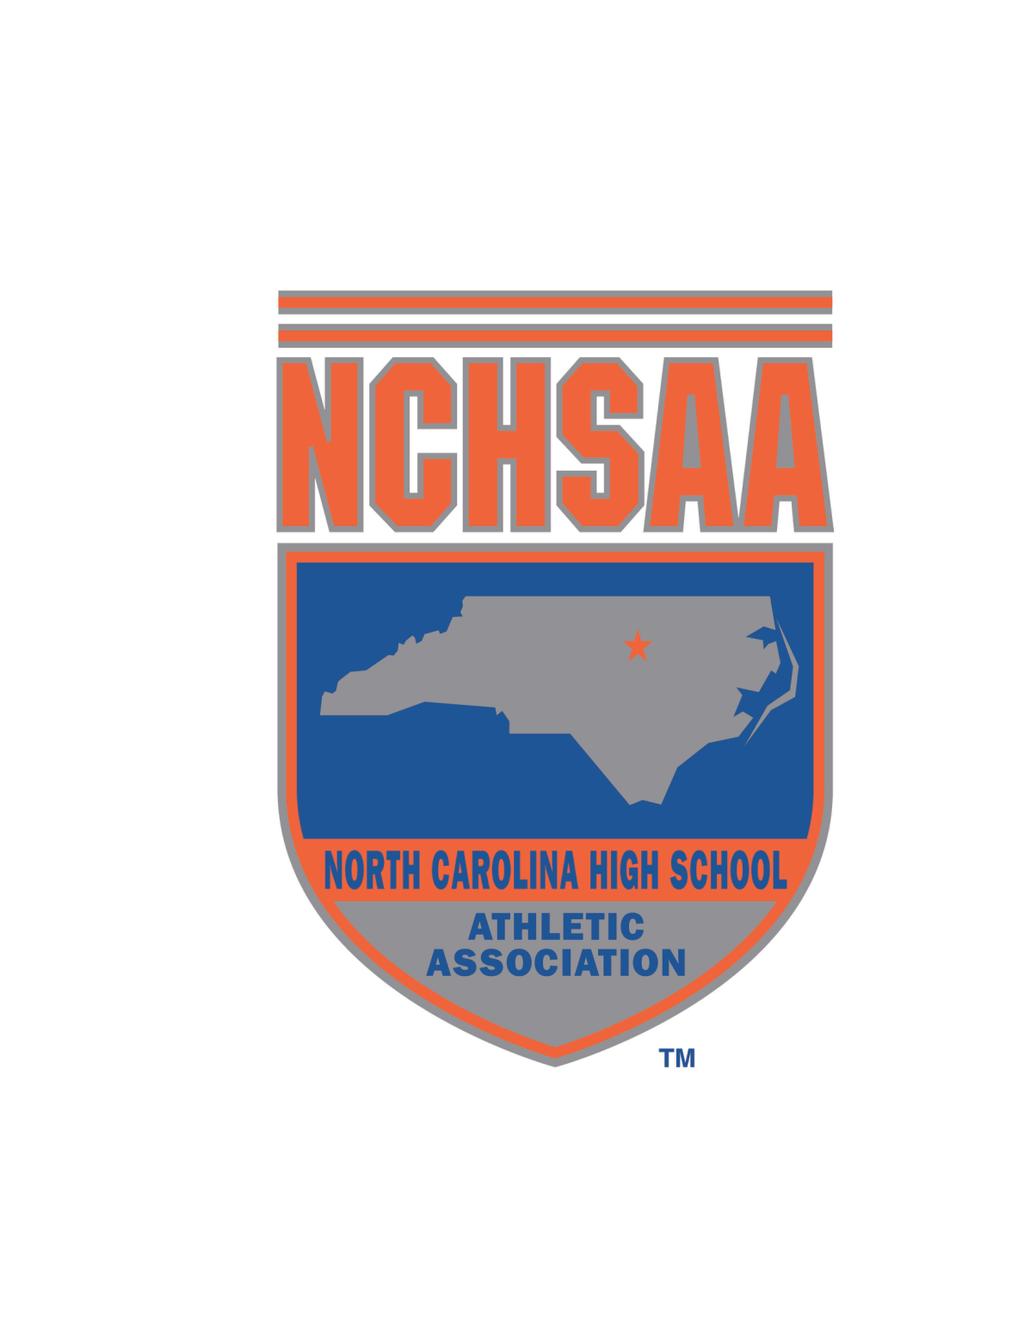 Gfeller-Waller NCHSAA Student-Athlete & Parent/Legal Custodian Concussion Statement Form Instructions: The student athlete and his/her parent or legal custodian, must initial beside each statement